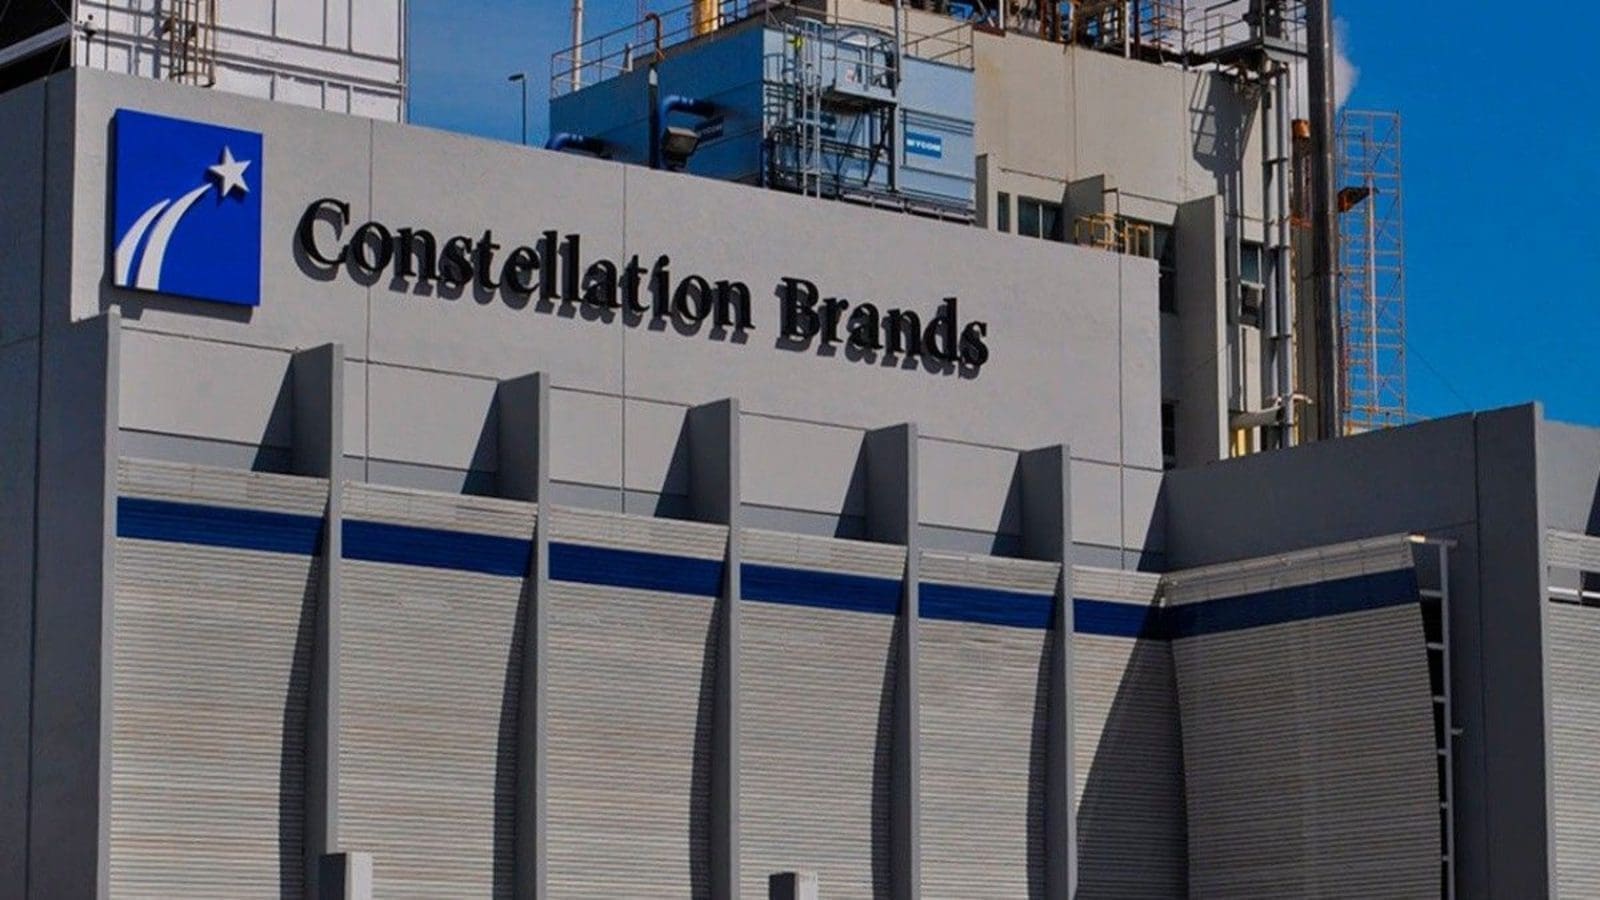 Constellation Brands not giving up on Mexico, plots new US$1.3B new brewery